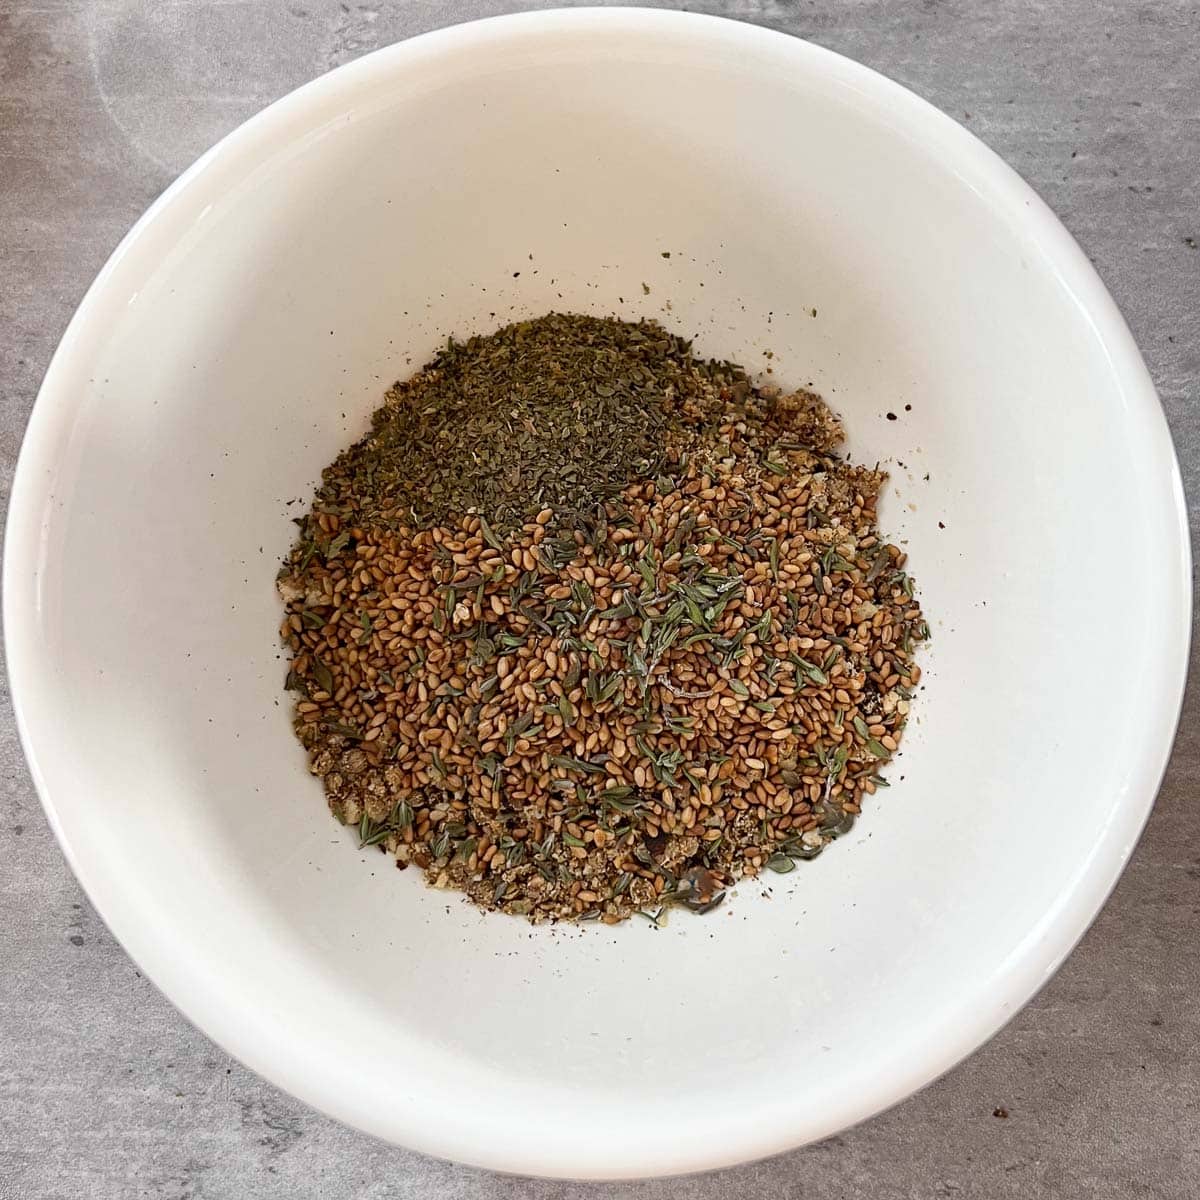 thyme, mint, and sesame sees added to dukka mixture